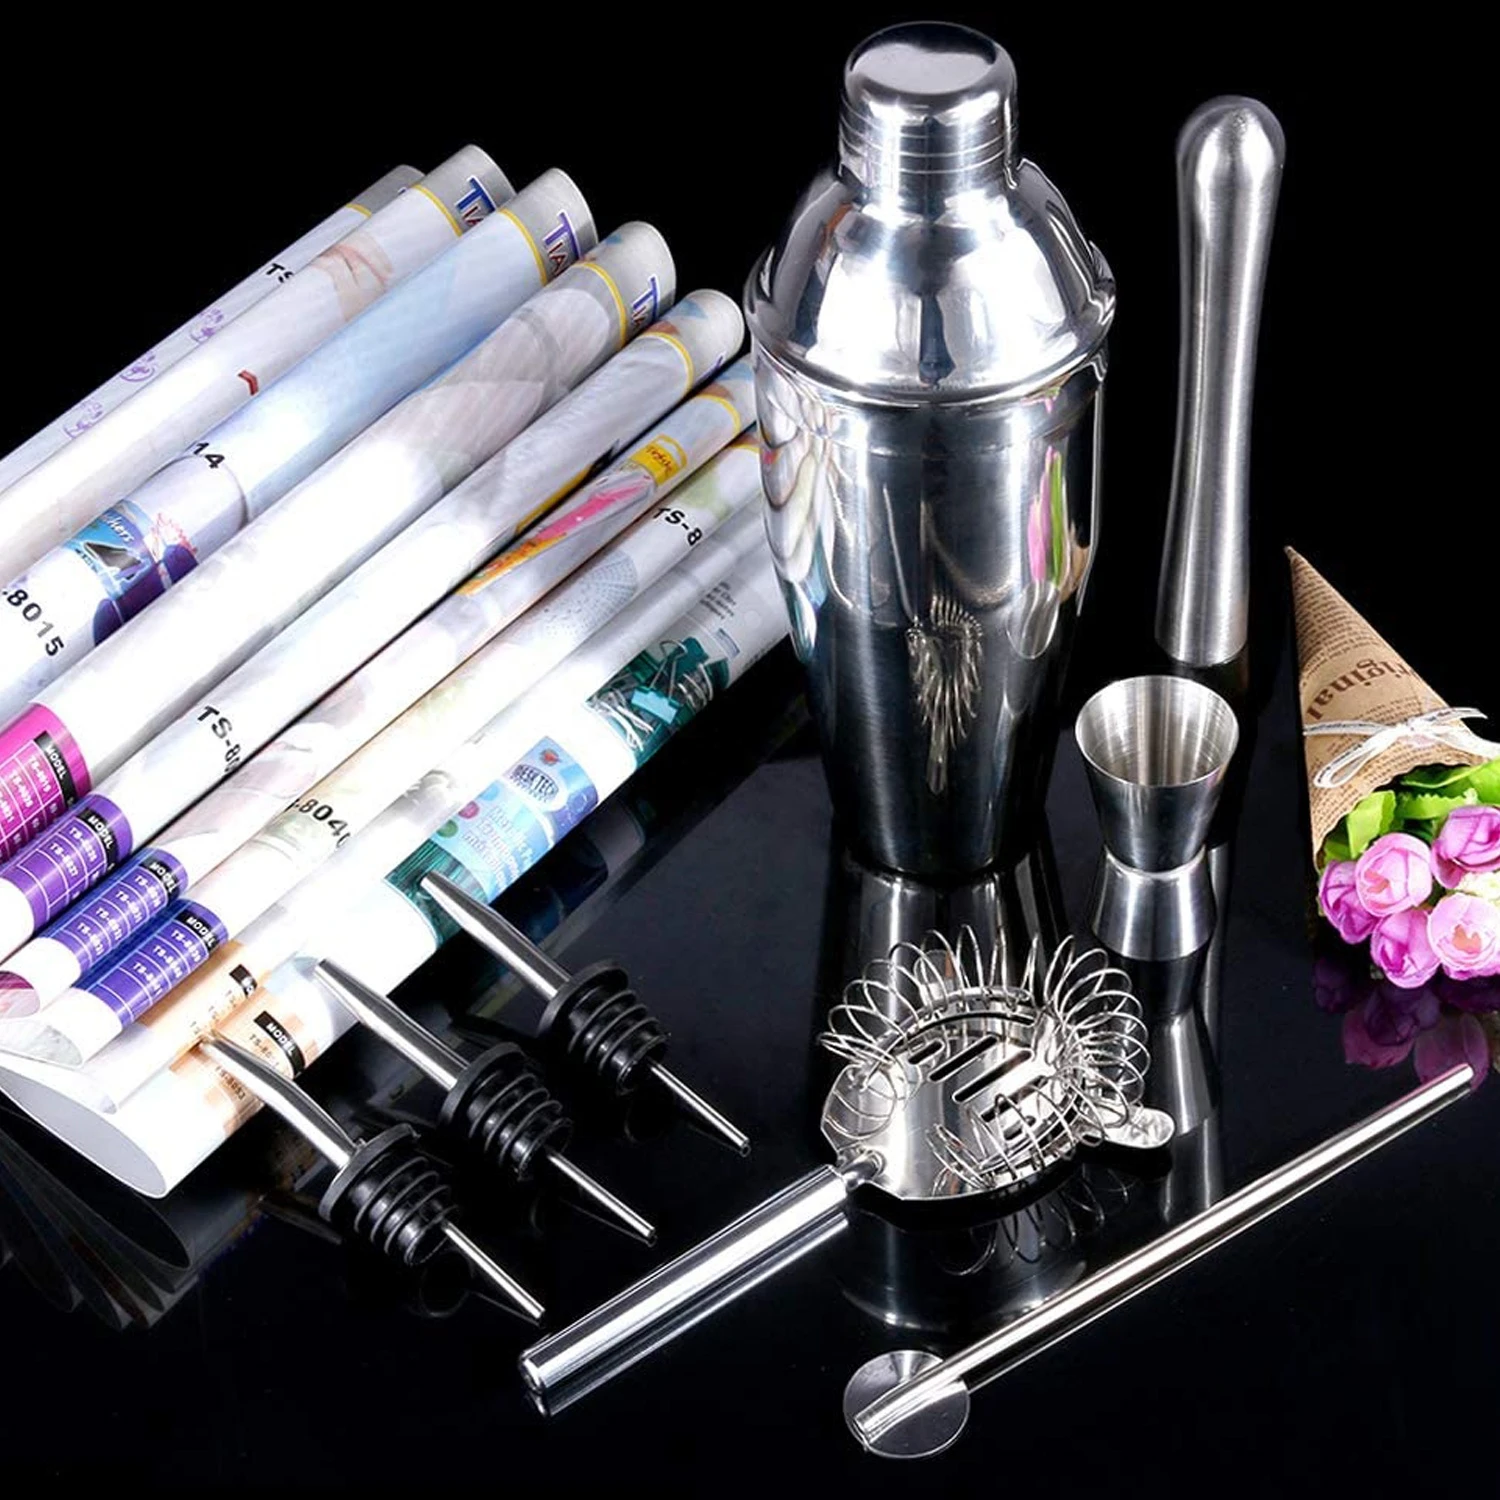 Amazon Top Seller Custom 10 Pieces Cocktail Shaker Making Set Stainless Steel Bar Tool Set Bartender Kit with Recipe Booklet